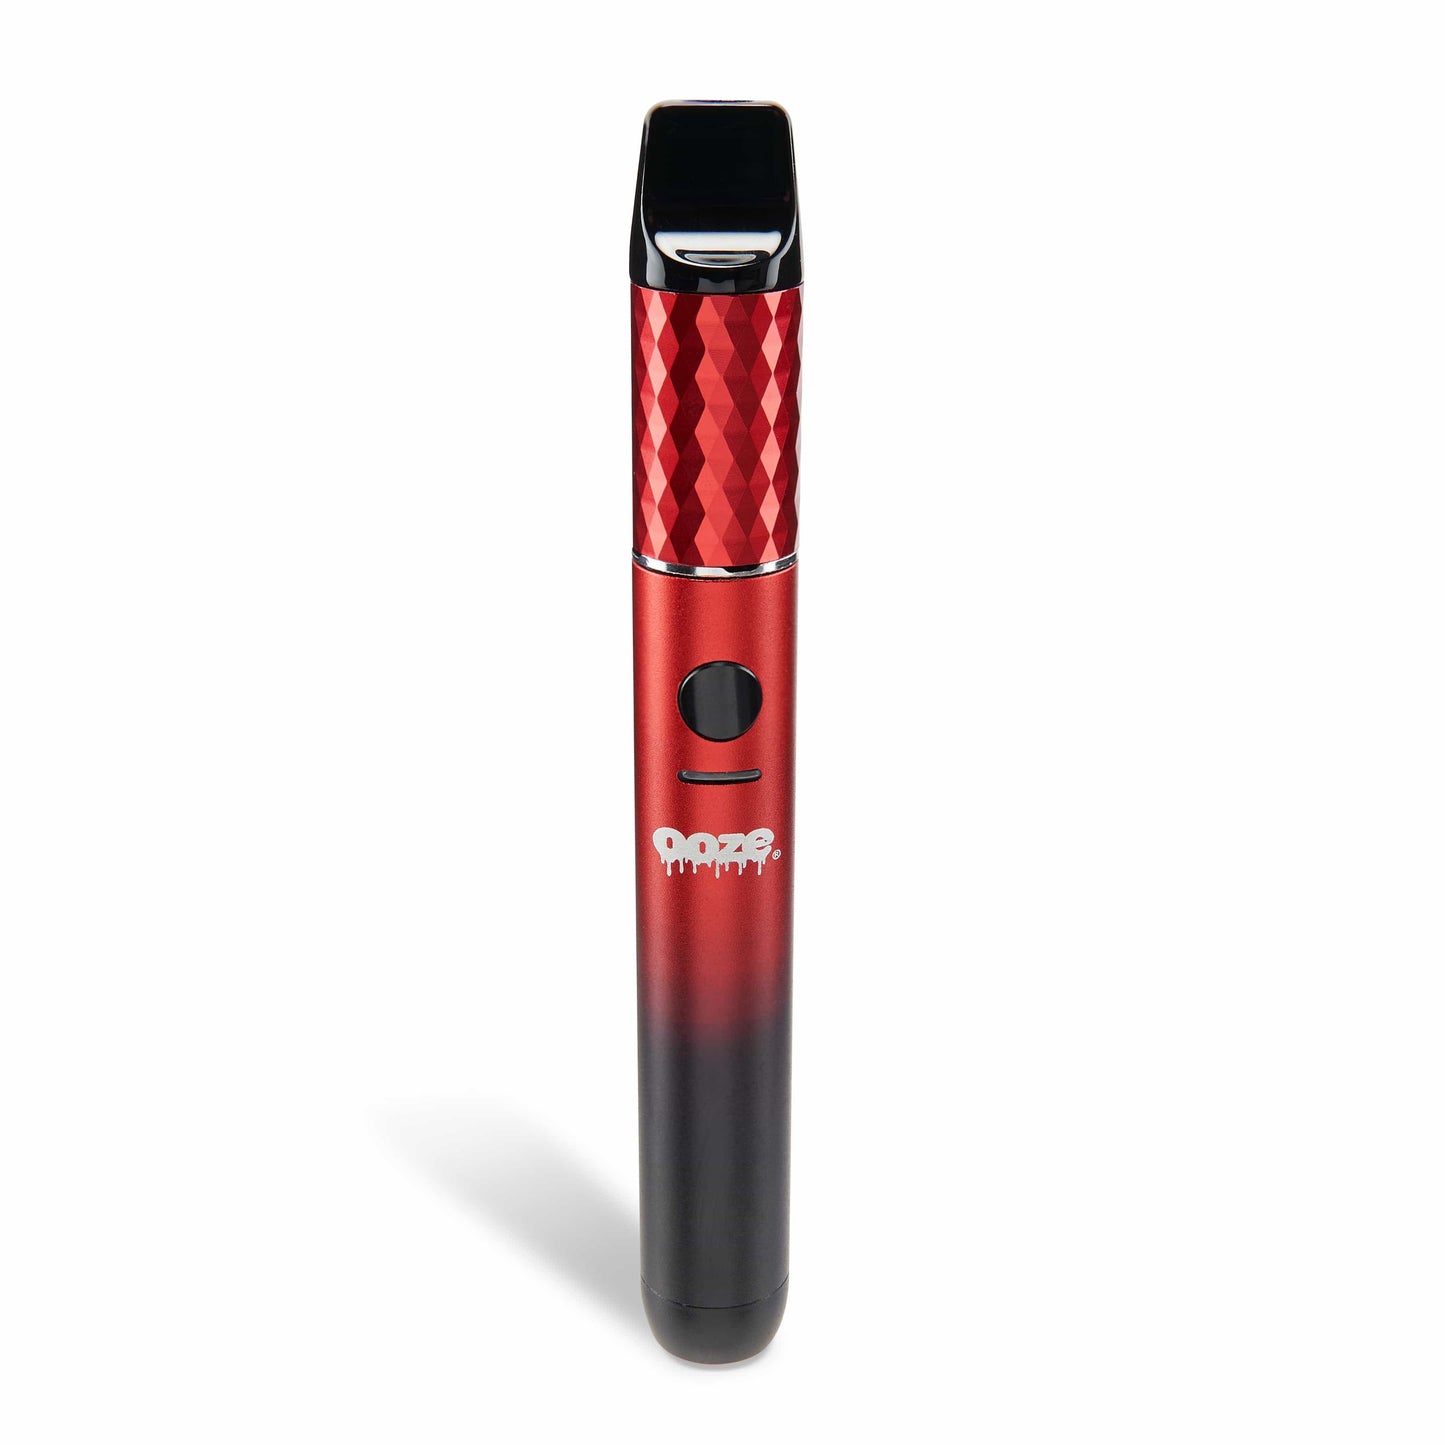 Ooze Batteries and Vapes Ooze Beacon Extract Vaporizer – C-Core 800 mAh